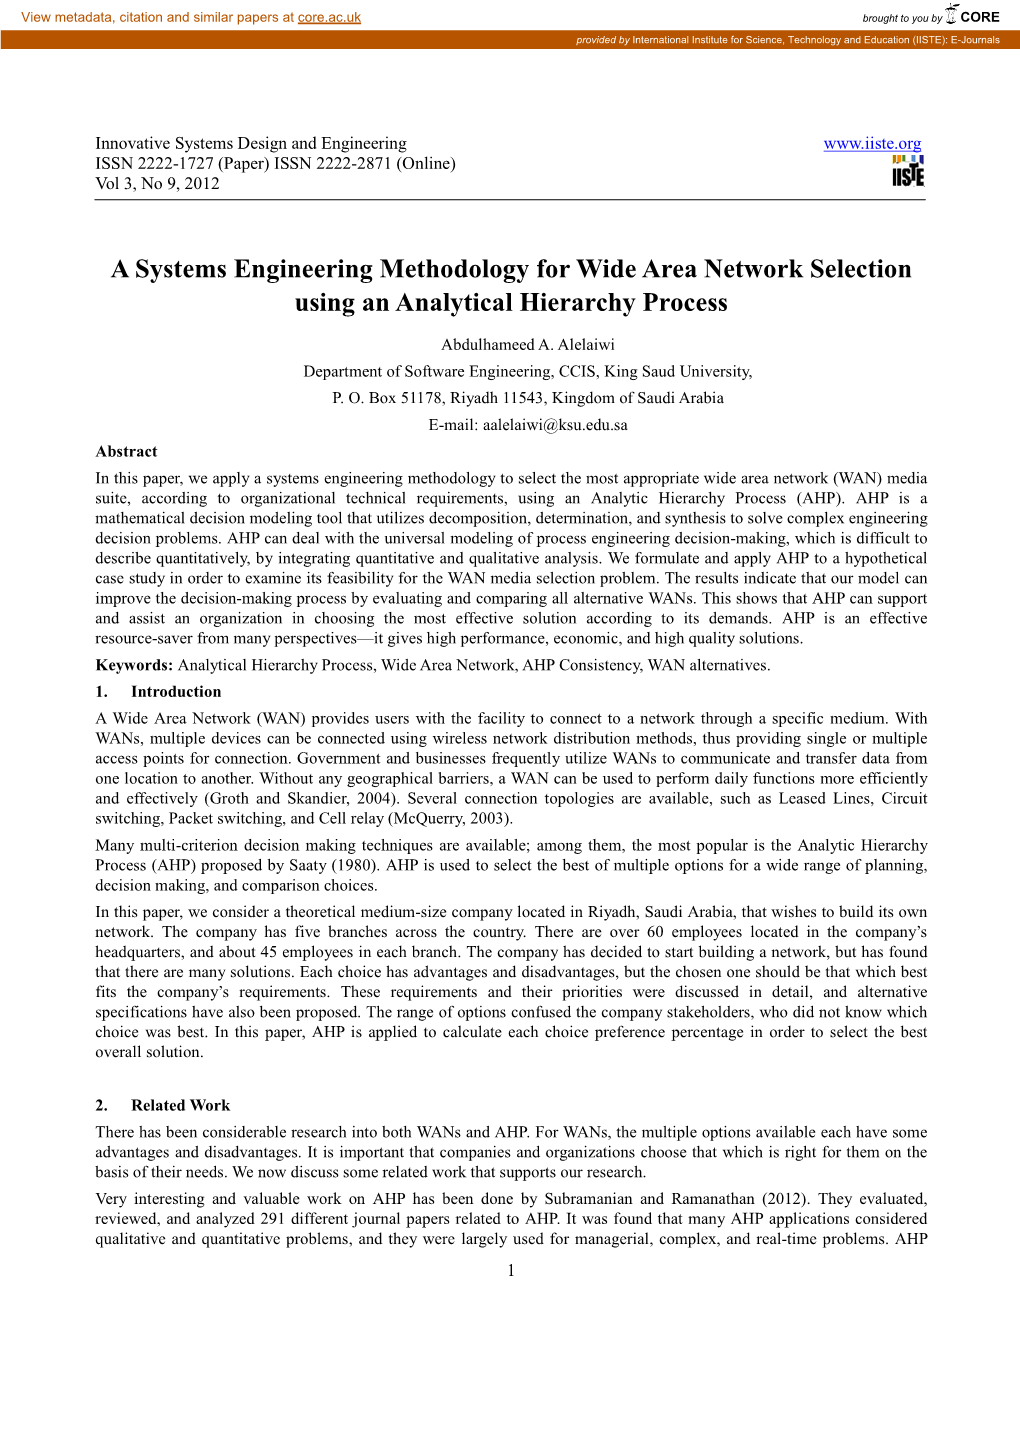 A Systems Engineering Methodology for Wide Area Network Selection Using an Analytical Hierarchy Process